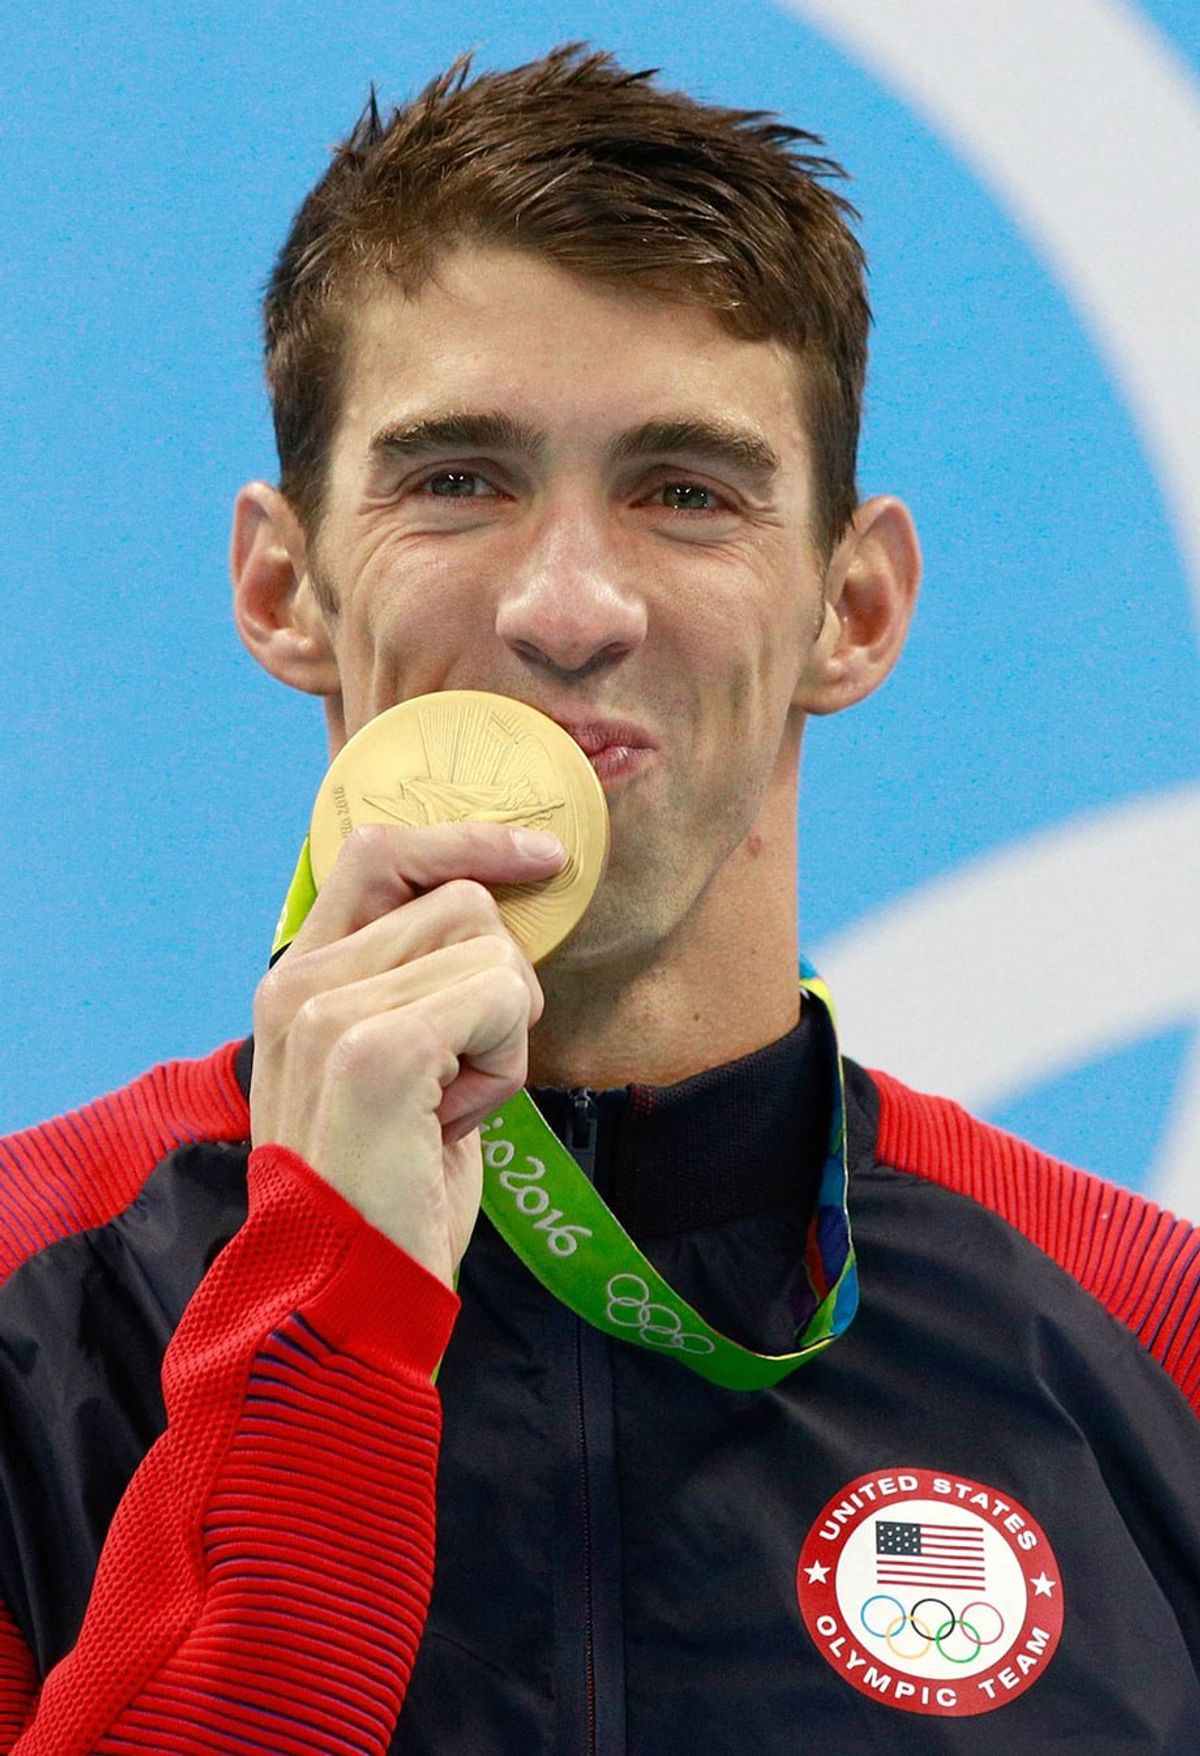 Michael Phelps: More Than Just An Athlete